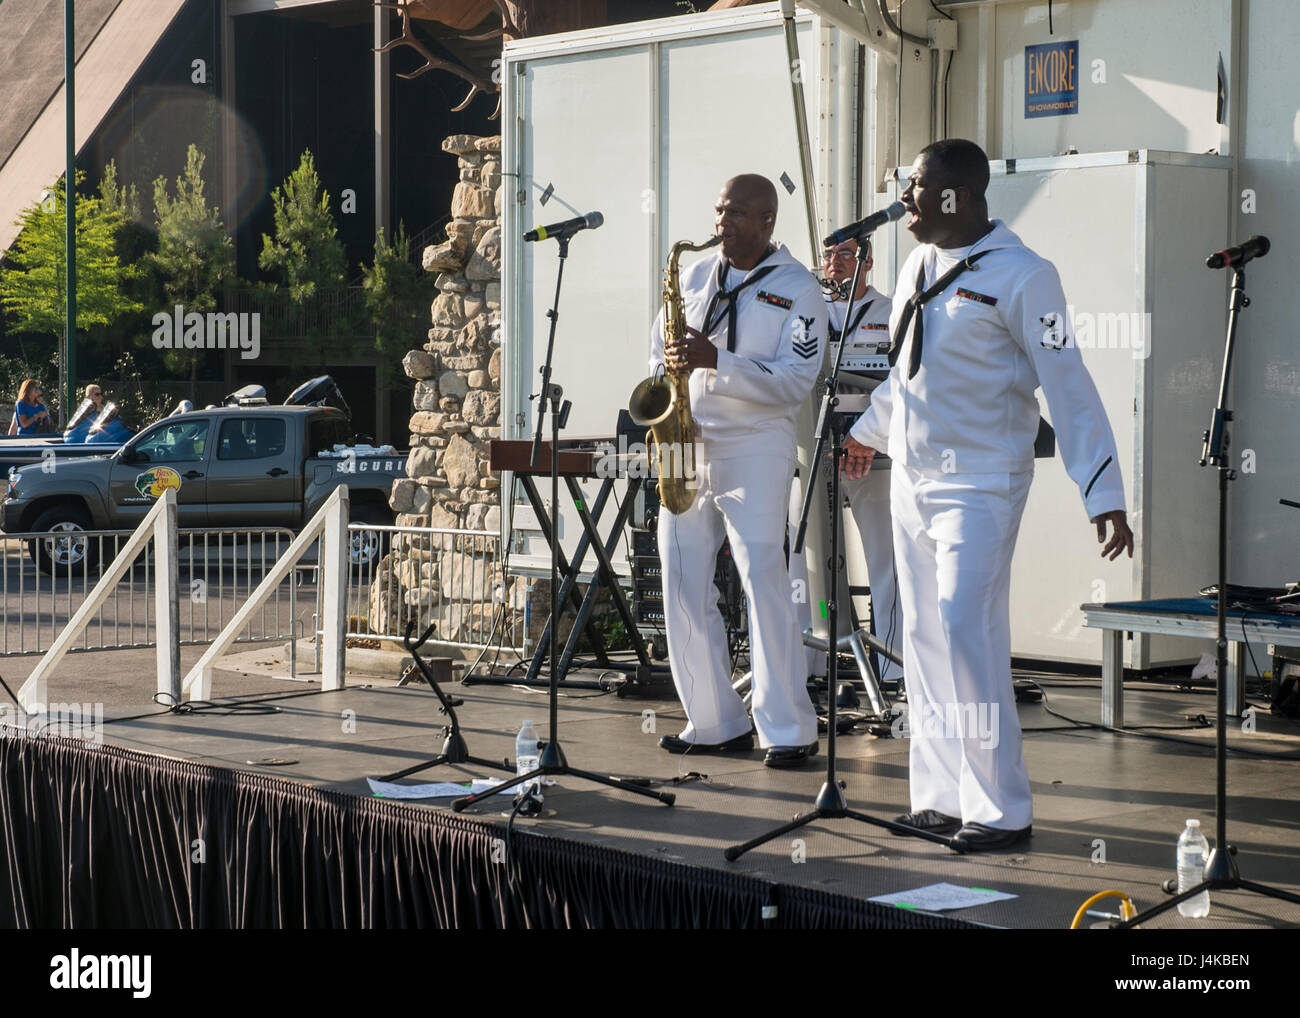 170508-N-RN782-014:  MEMPHIS, Tenn. (May 8, 2017) — U.S. Fleet Forces Band members Musician 1st Class Winnie Dawkins, left, from Nassau, Bahamas, and Musician 3rd Class Julius Coker, right, from Philadelphia, perform their set at The Pyramid in Memphis, Tenn. May 8, during Memphis Navy Week. Memphis Navy Week serves as the Navy's principle outreach effort in areas of the country without a significant Navy presence. (U.S. Navy photo by Mass Communication Specialist 2nd Class Brian T. Glunt/Released) Stock Photo